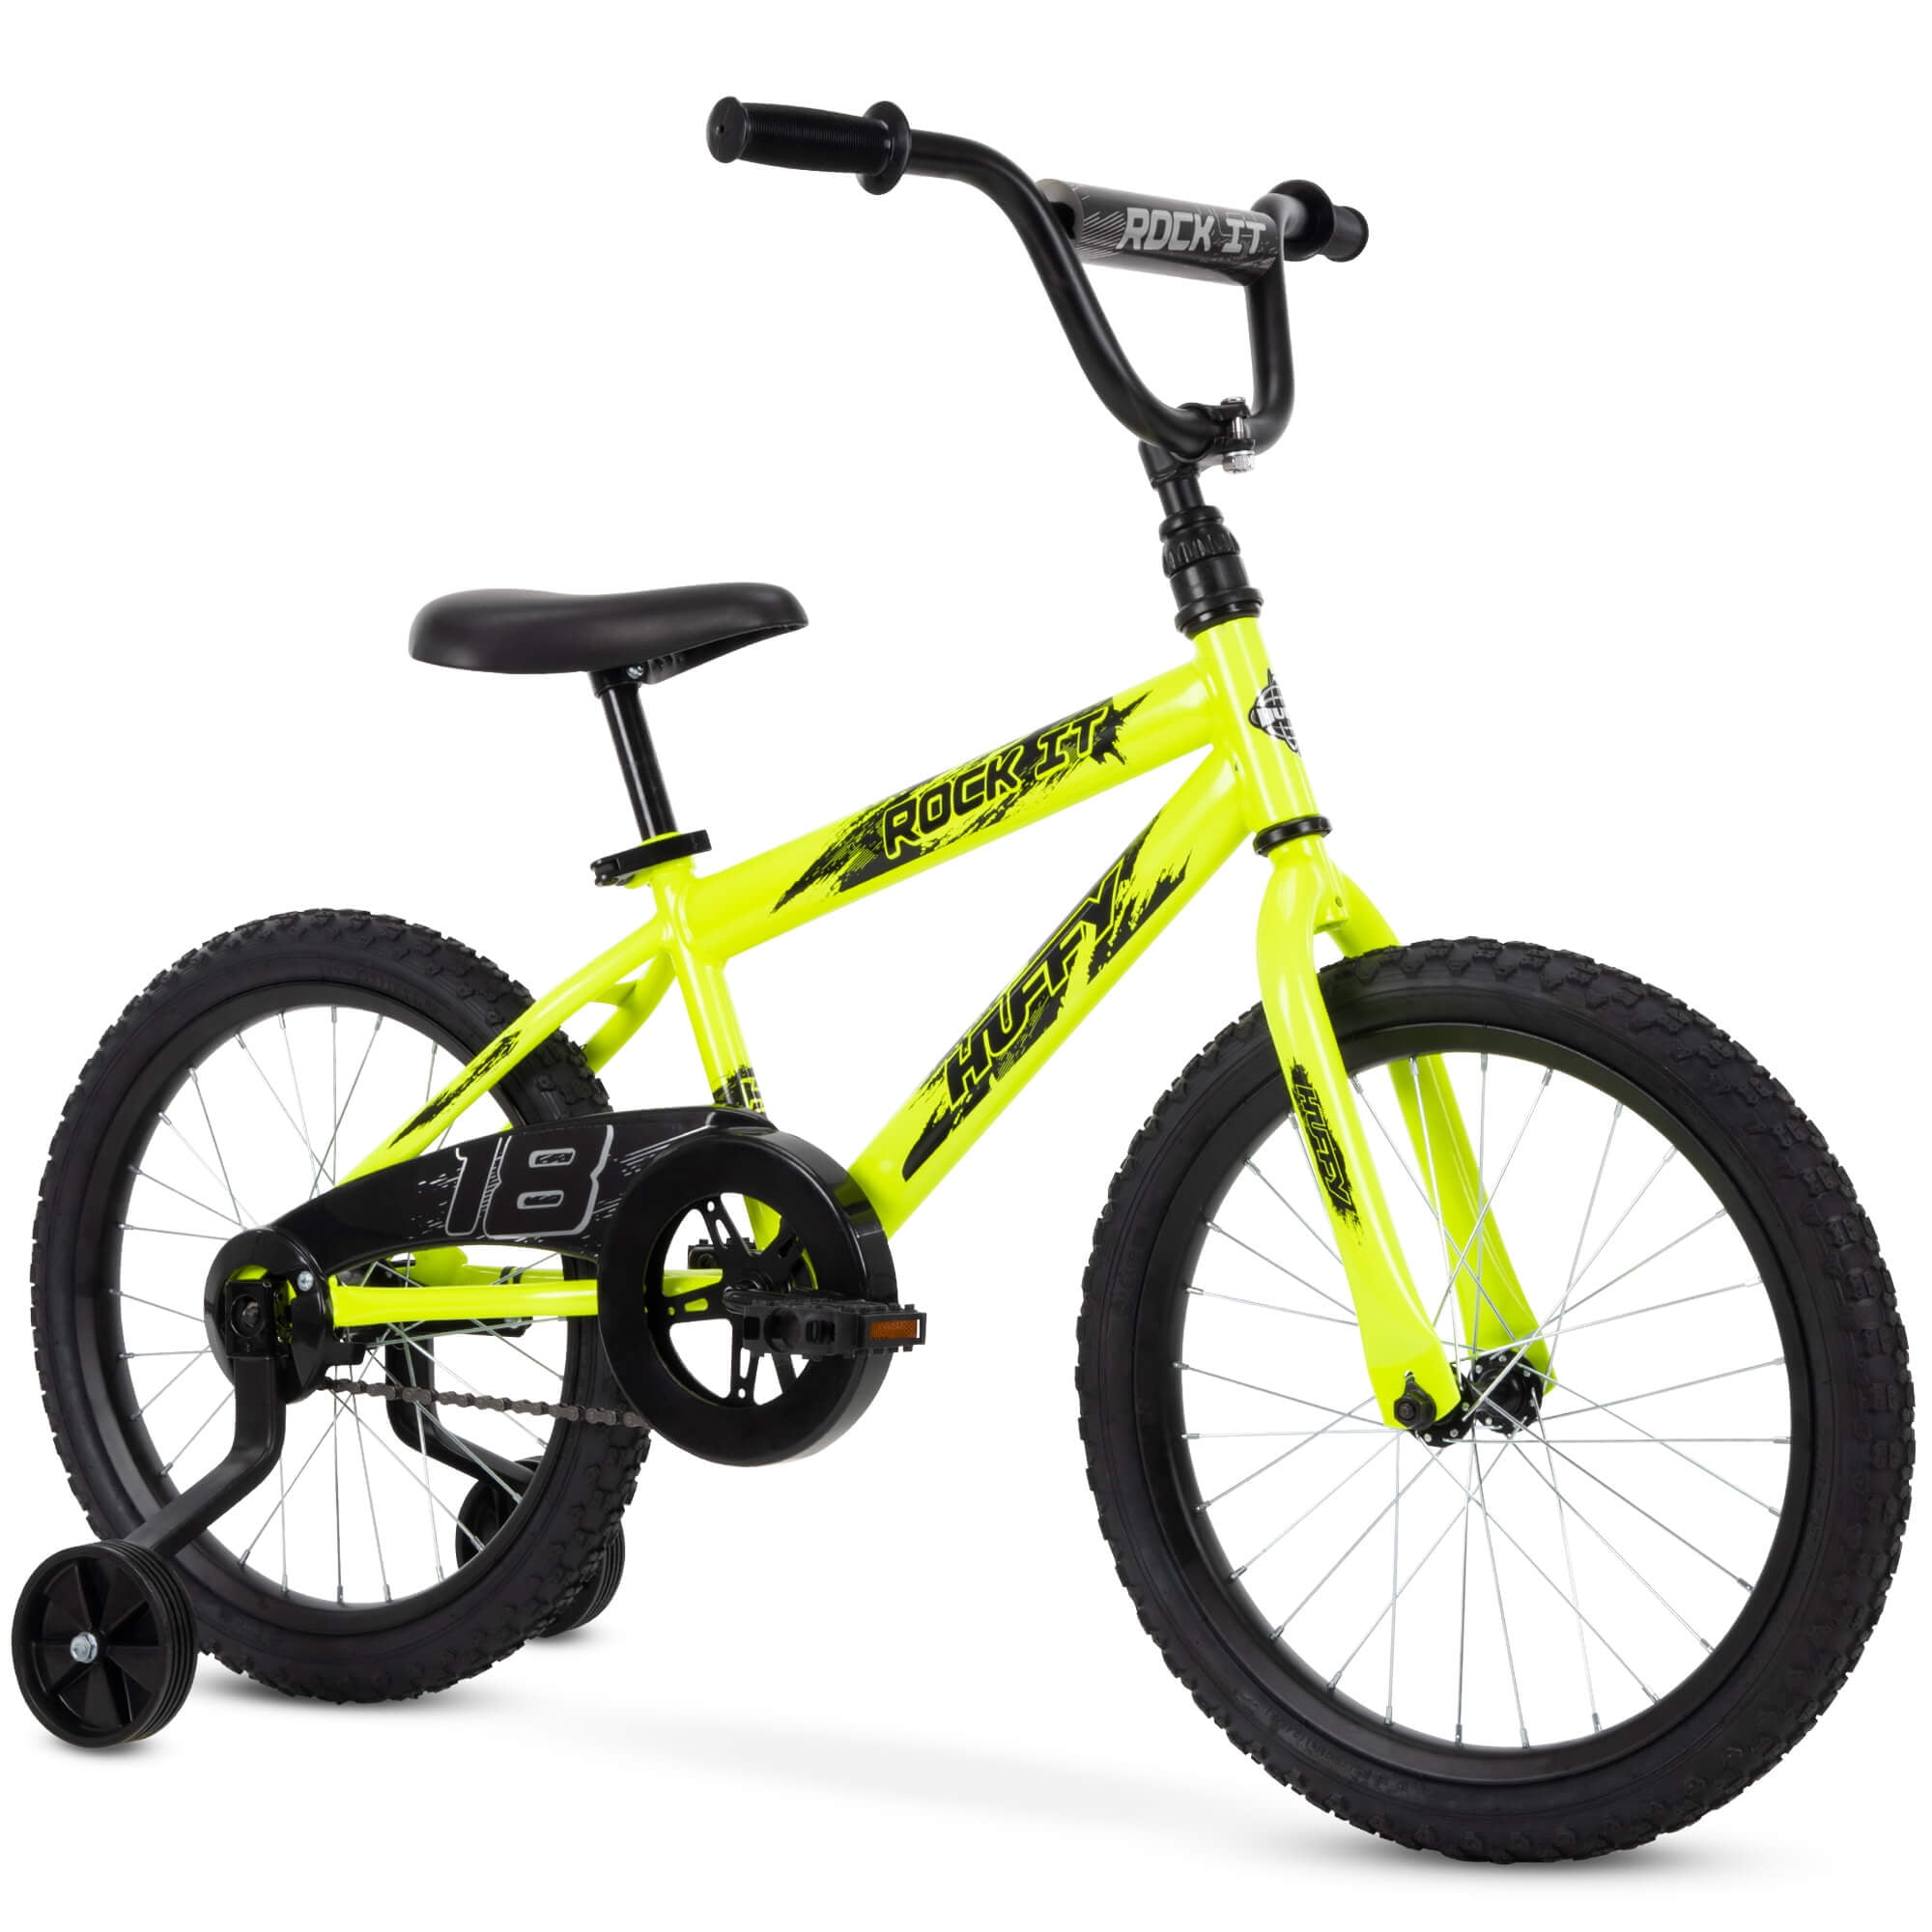 Charcoal for sale online Kent Abyss 31826 18" Boy's Bike 